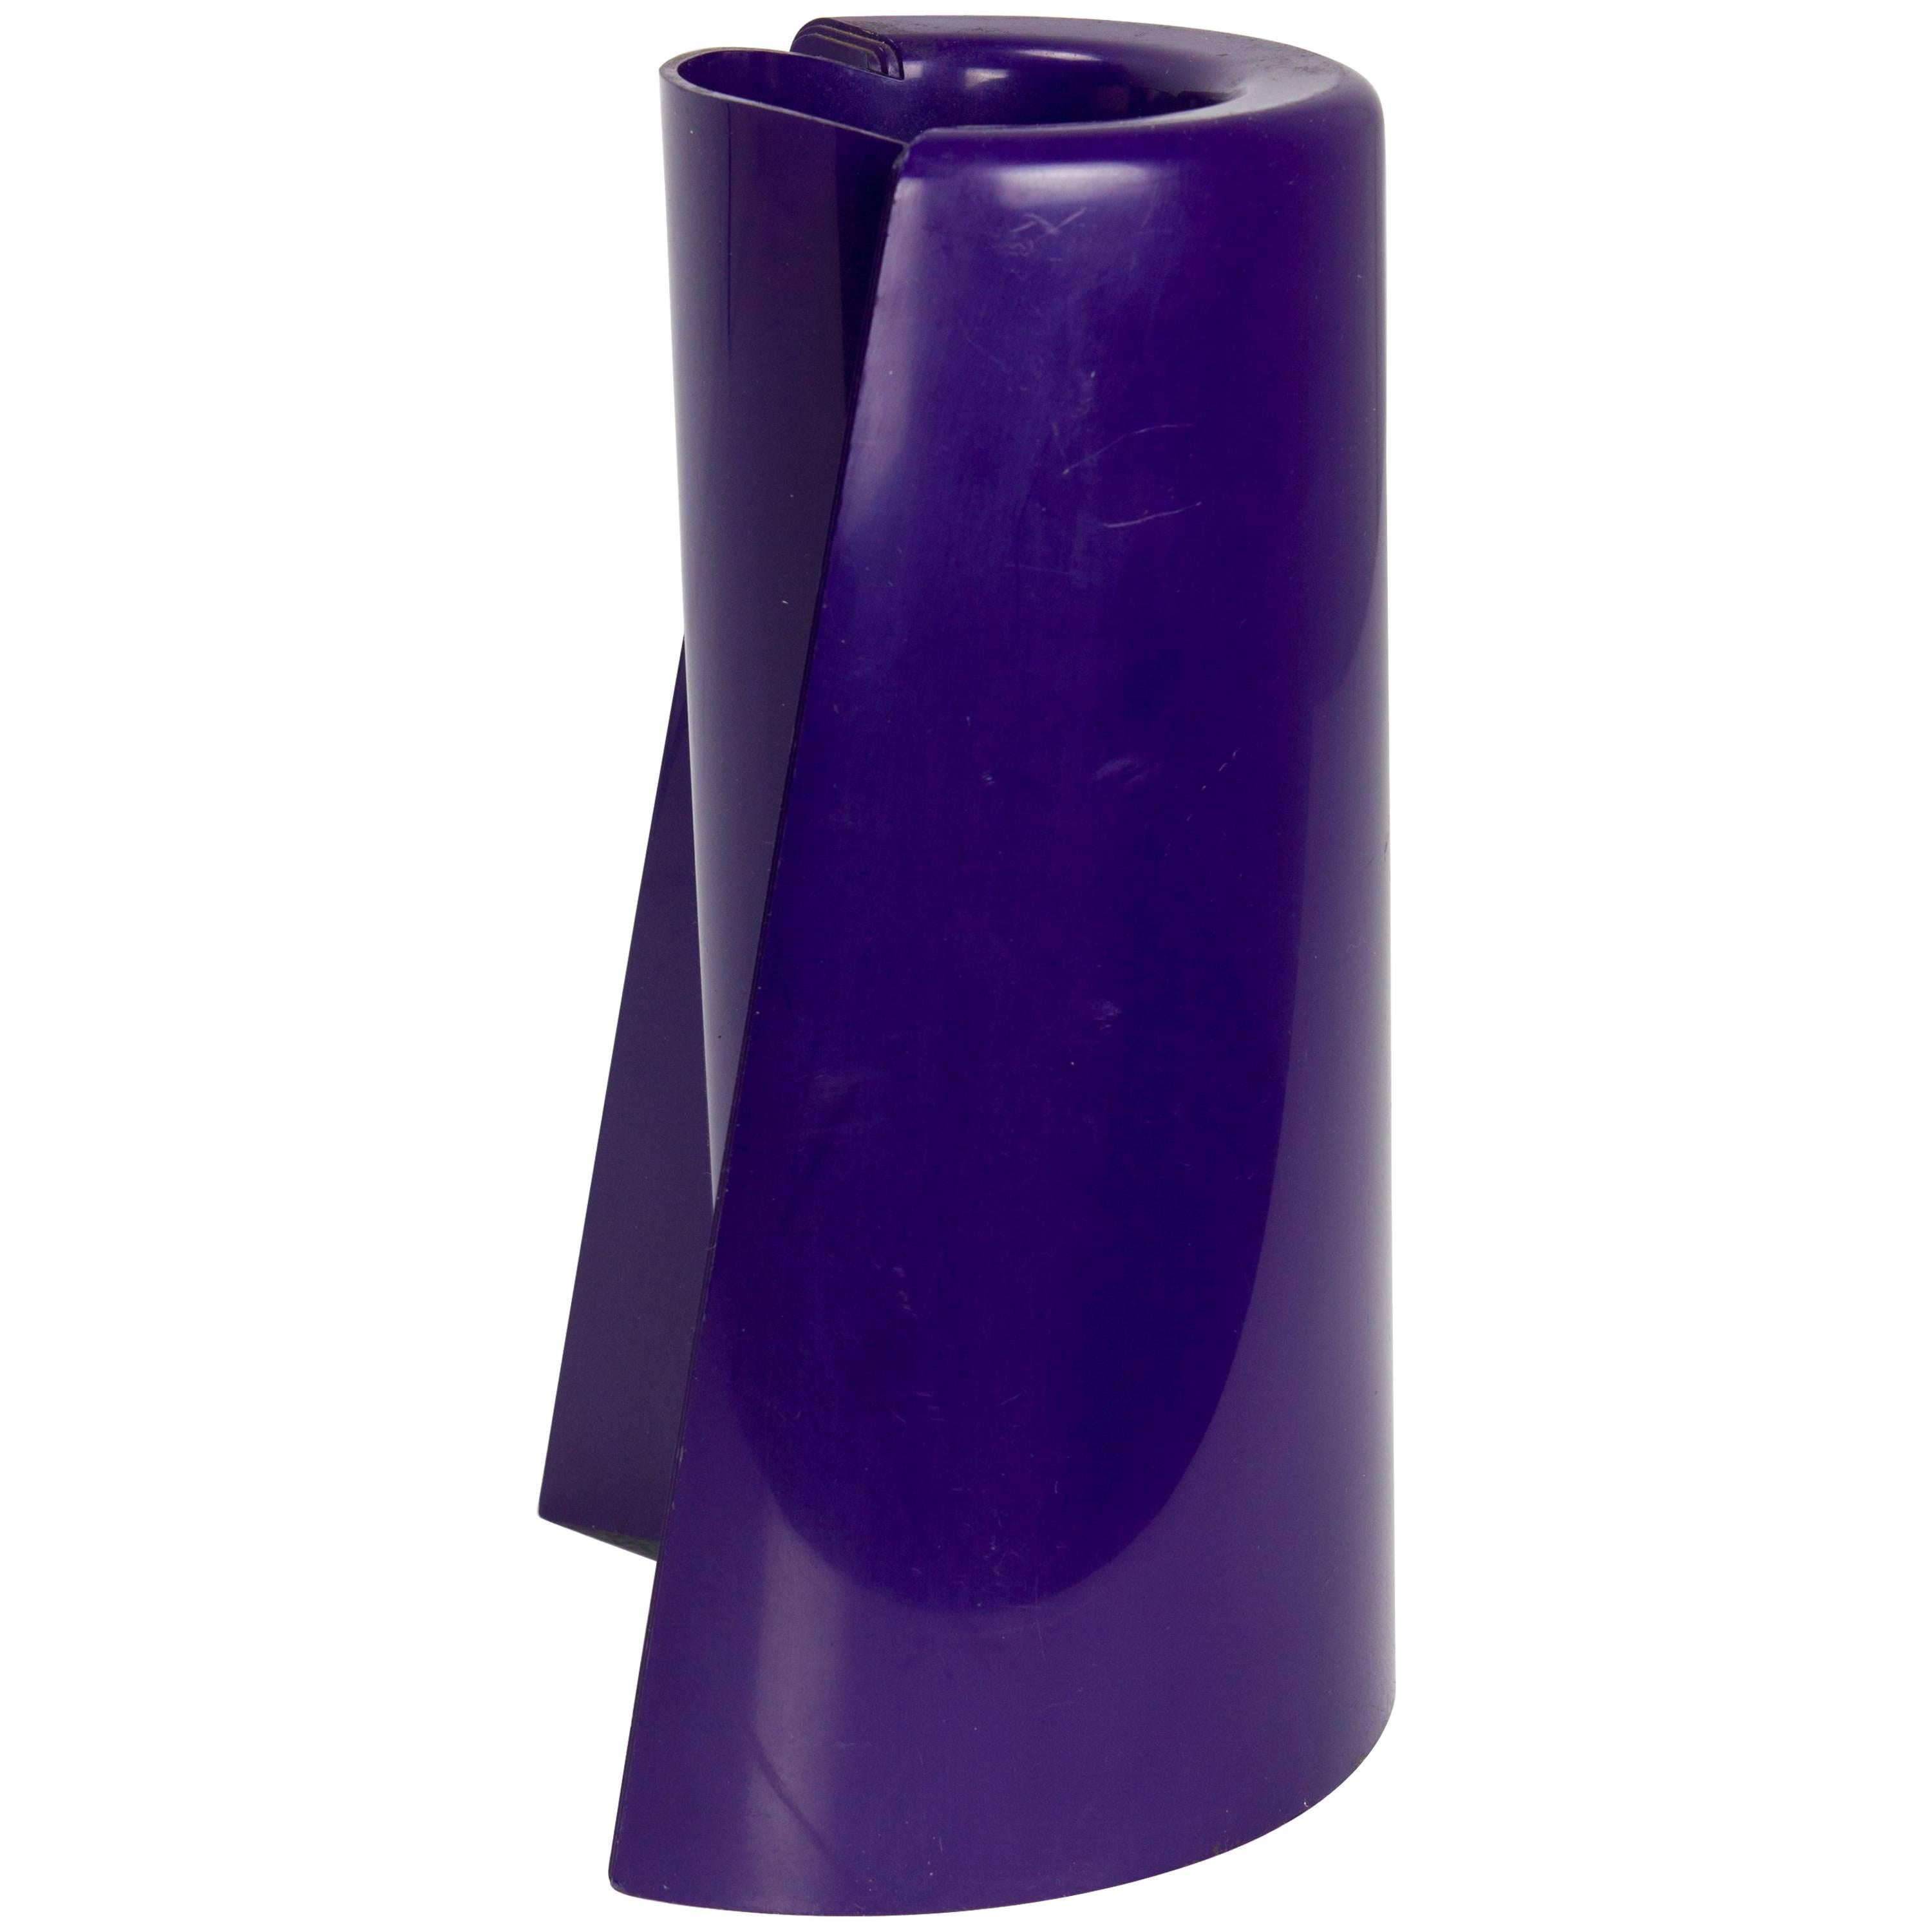 Enzo Mari Pago Pago Vase for Danese For Sale